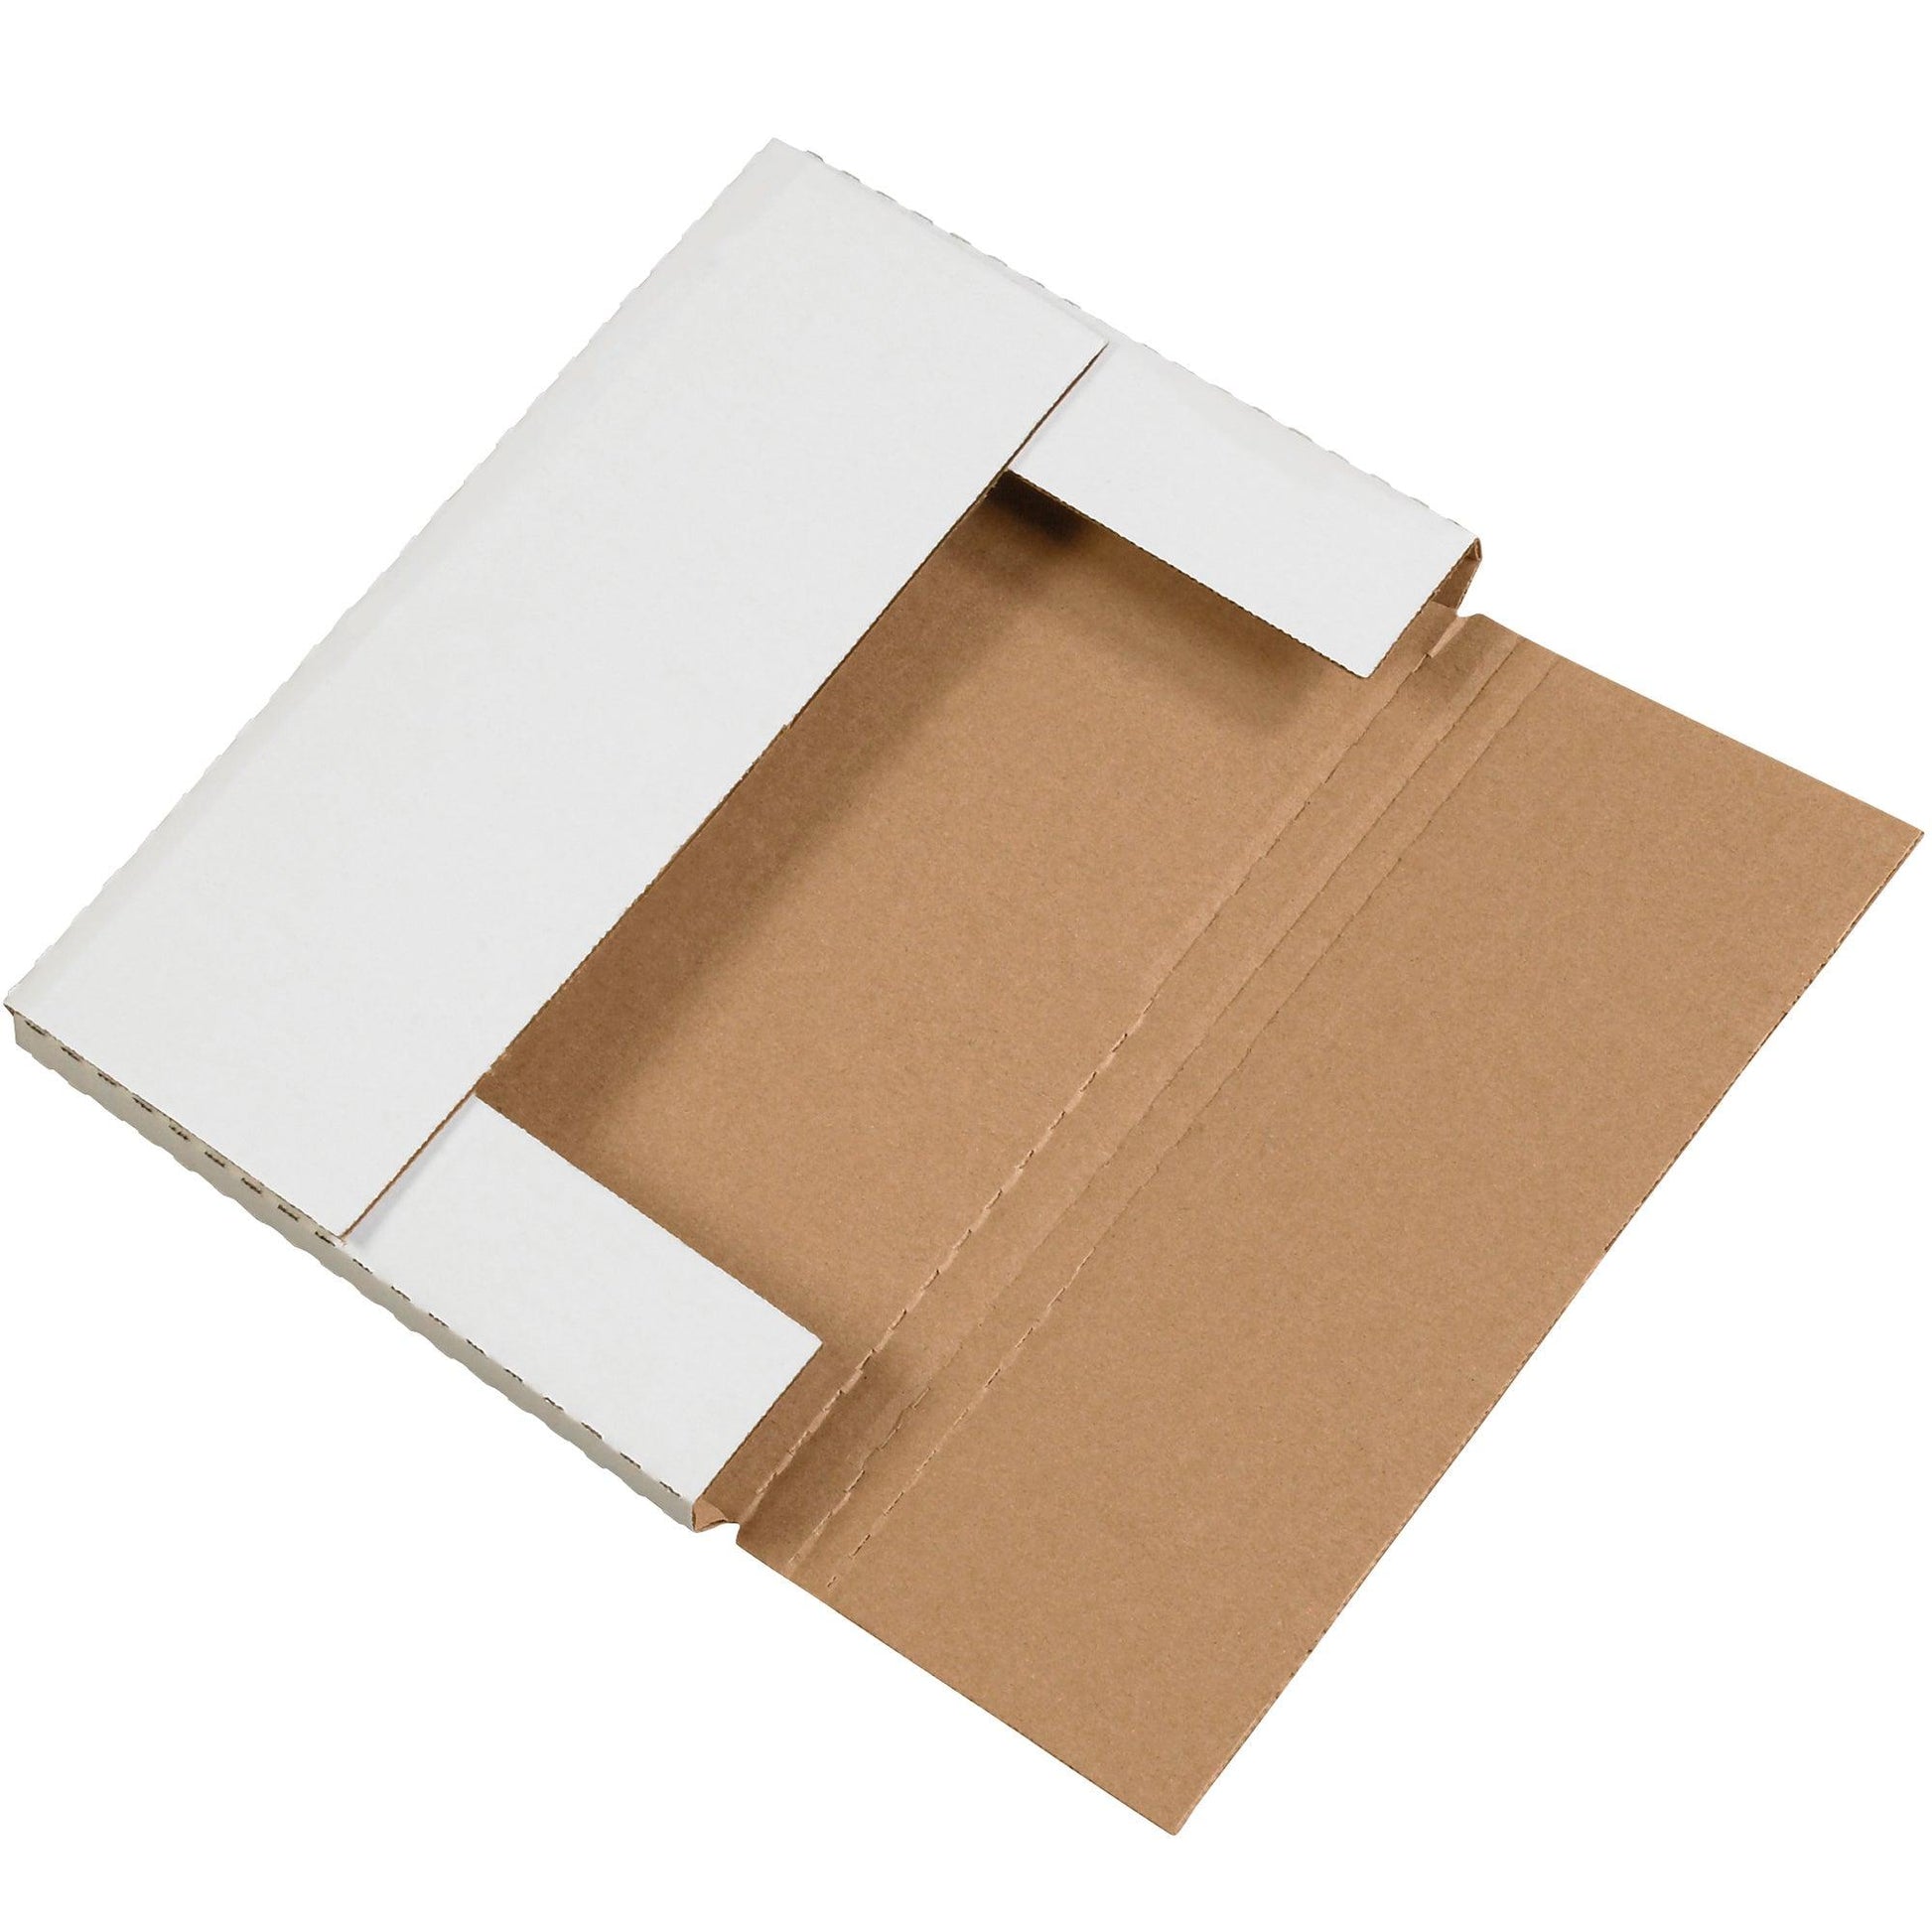 12 1/8 x 9 1/8 x 1" White Easy-Fold Mailers - M1291